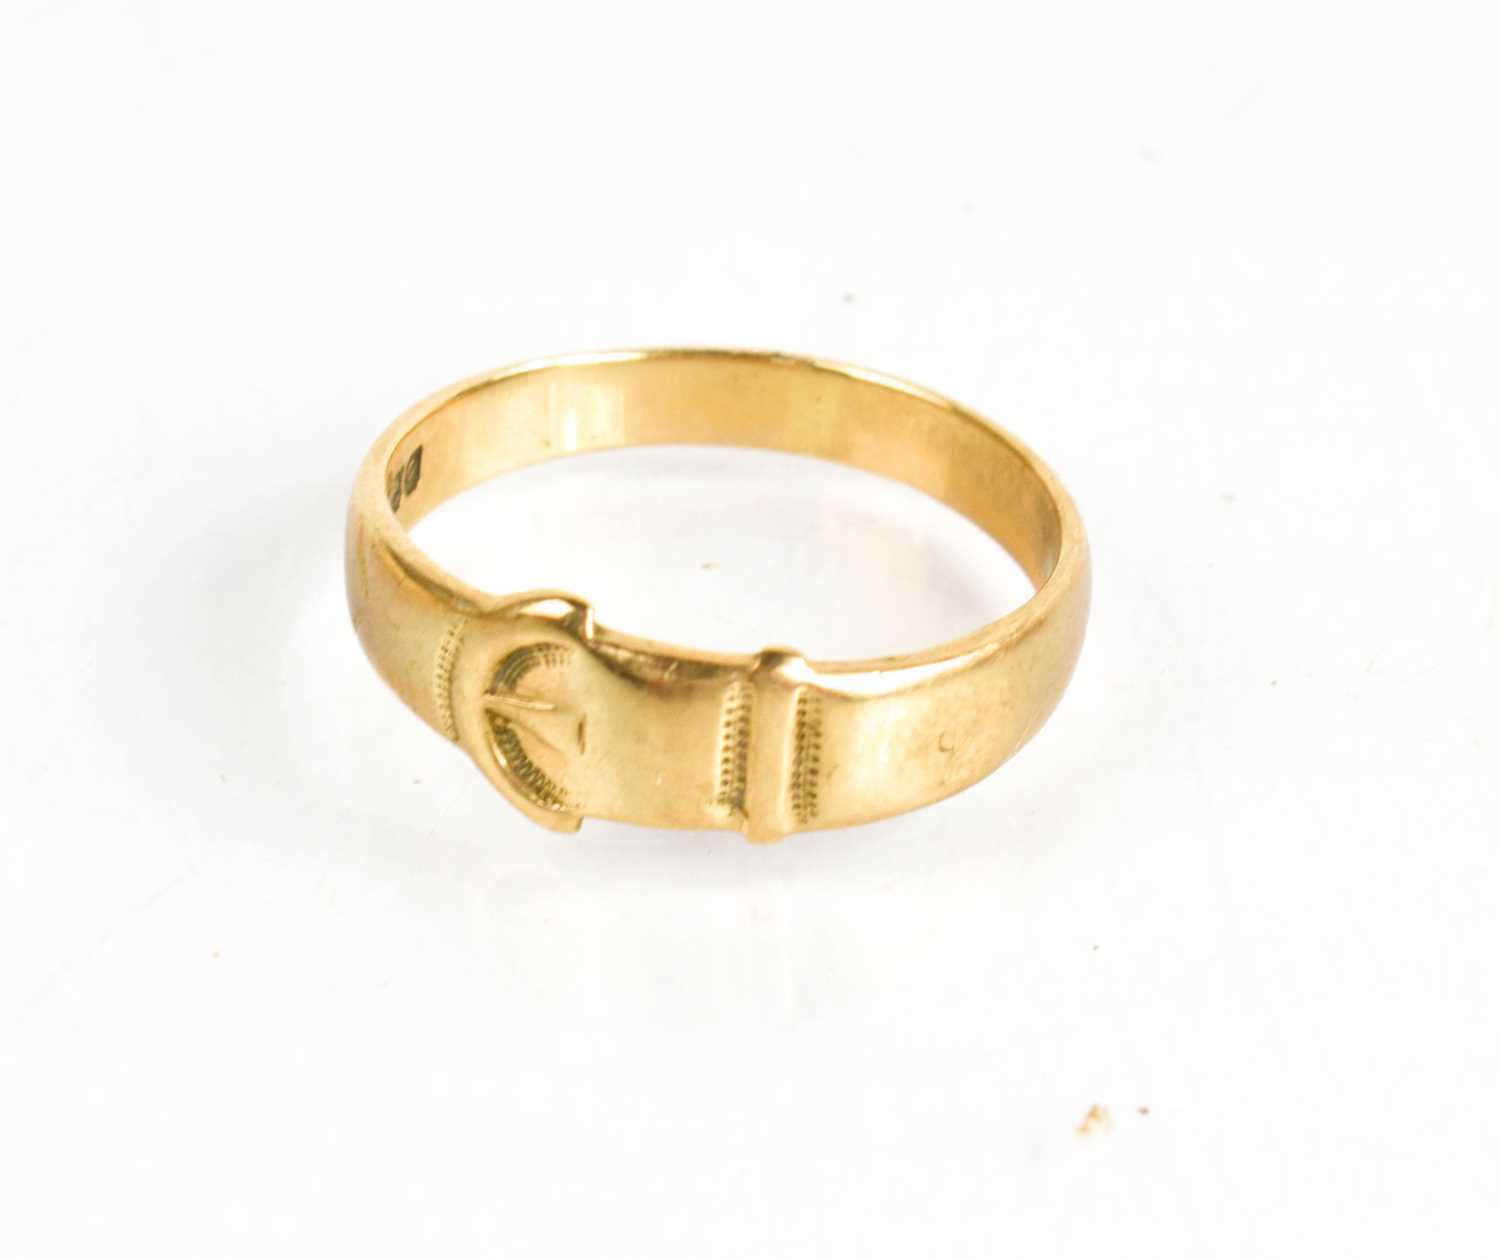 A 9ct gold belt buckle ring, 3.7g.